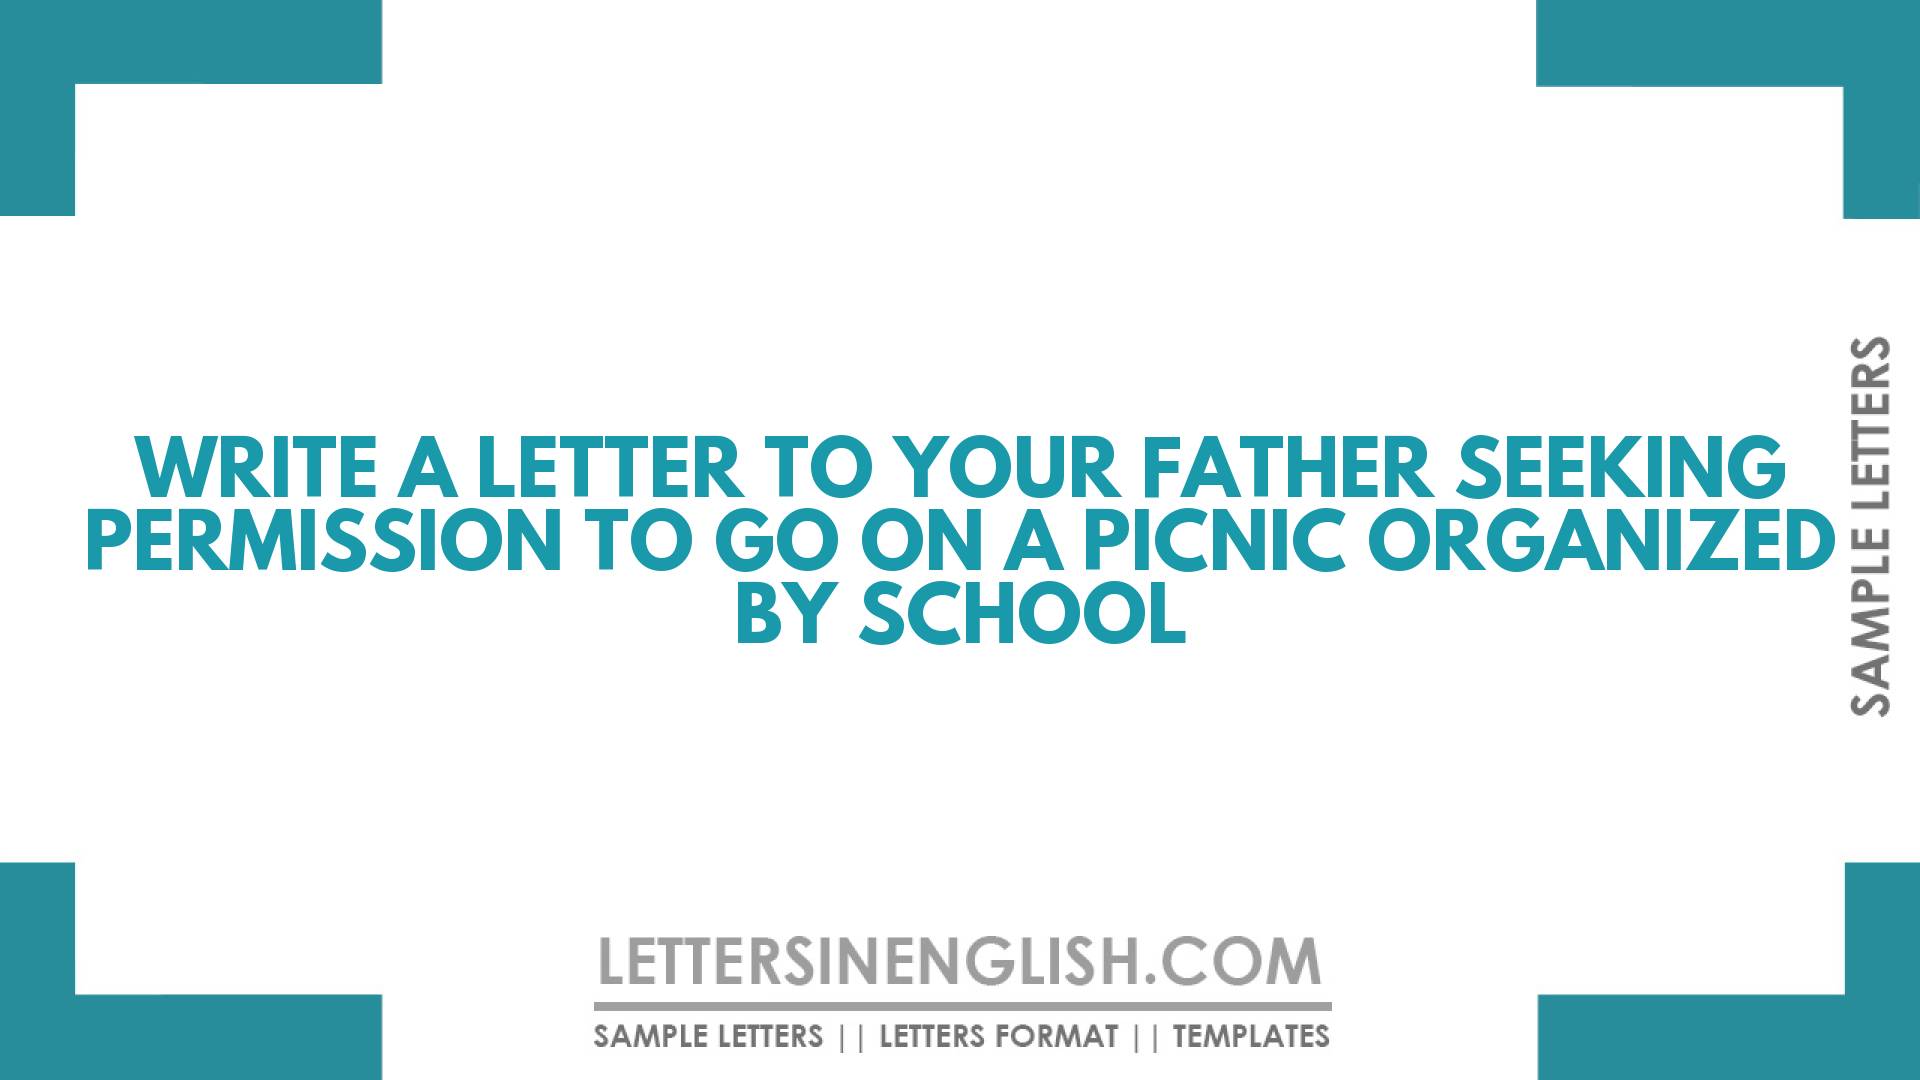 Write a Letter to Your Father Seeking Permission to Go on a Picnic Organized by School